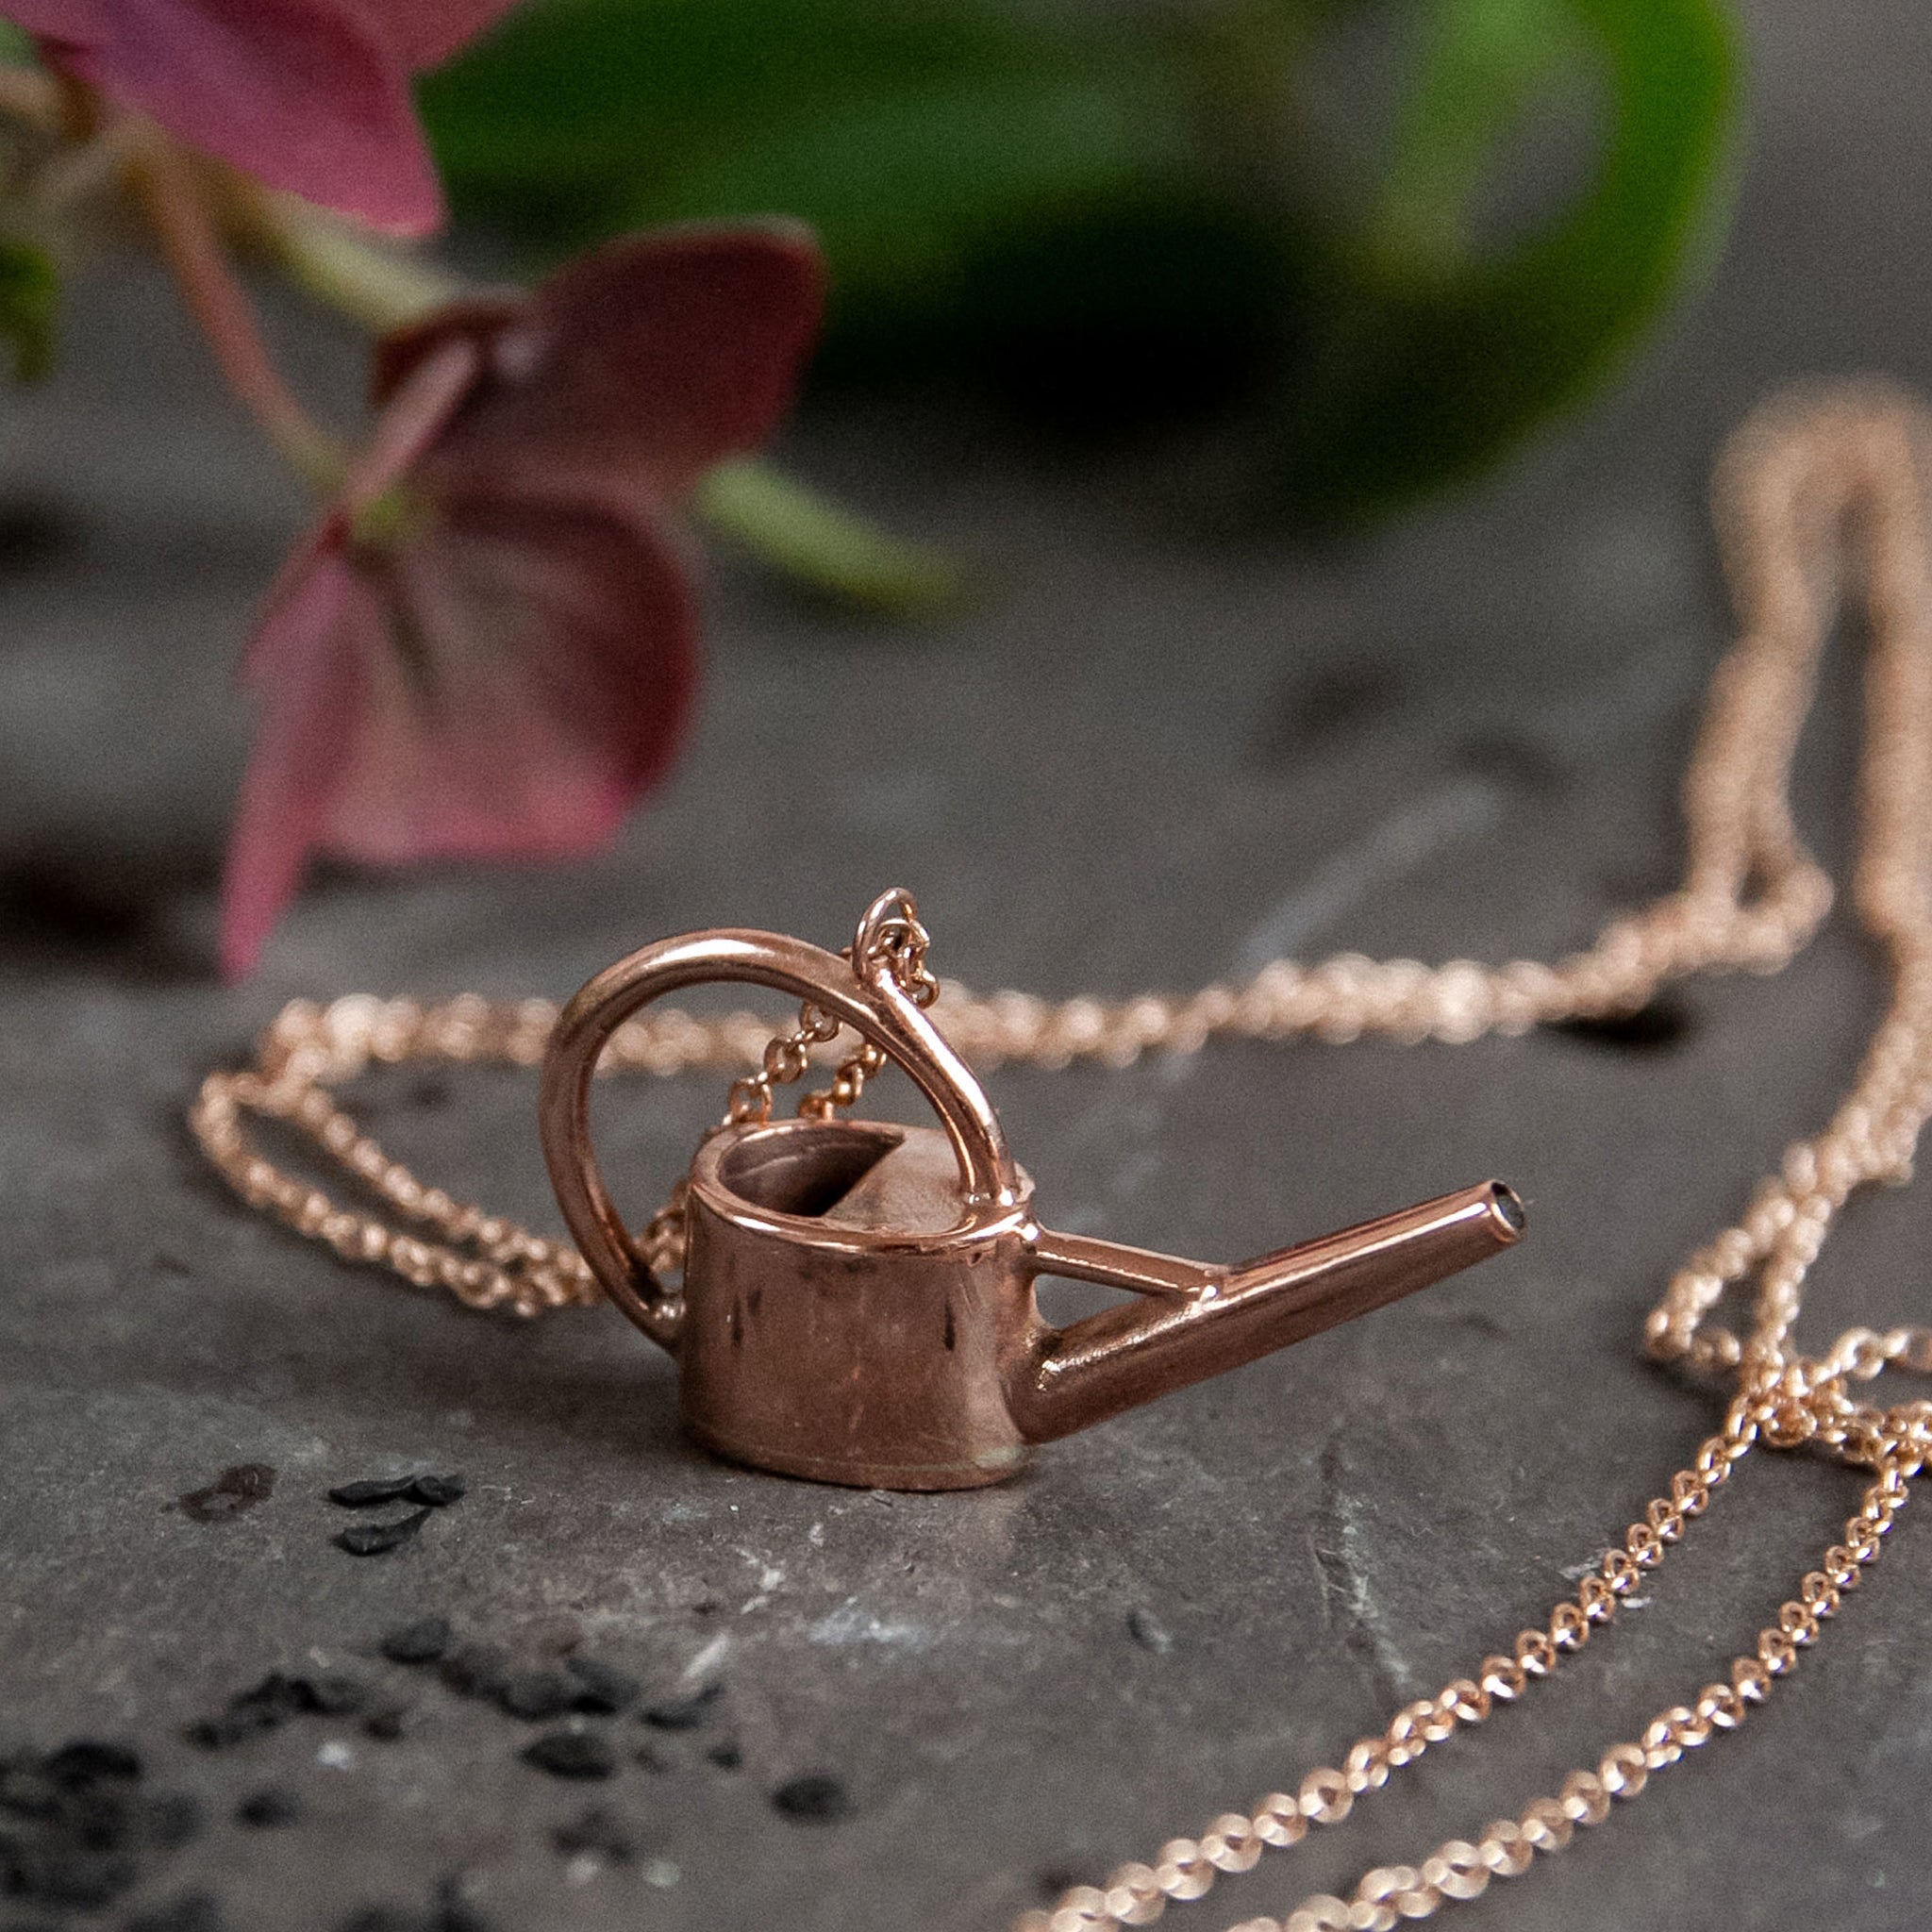 Ellen Lou Gardening Jewellery 9ct Rose Gold Watering Can Necklace